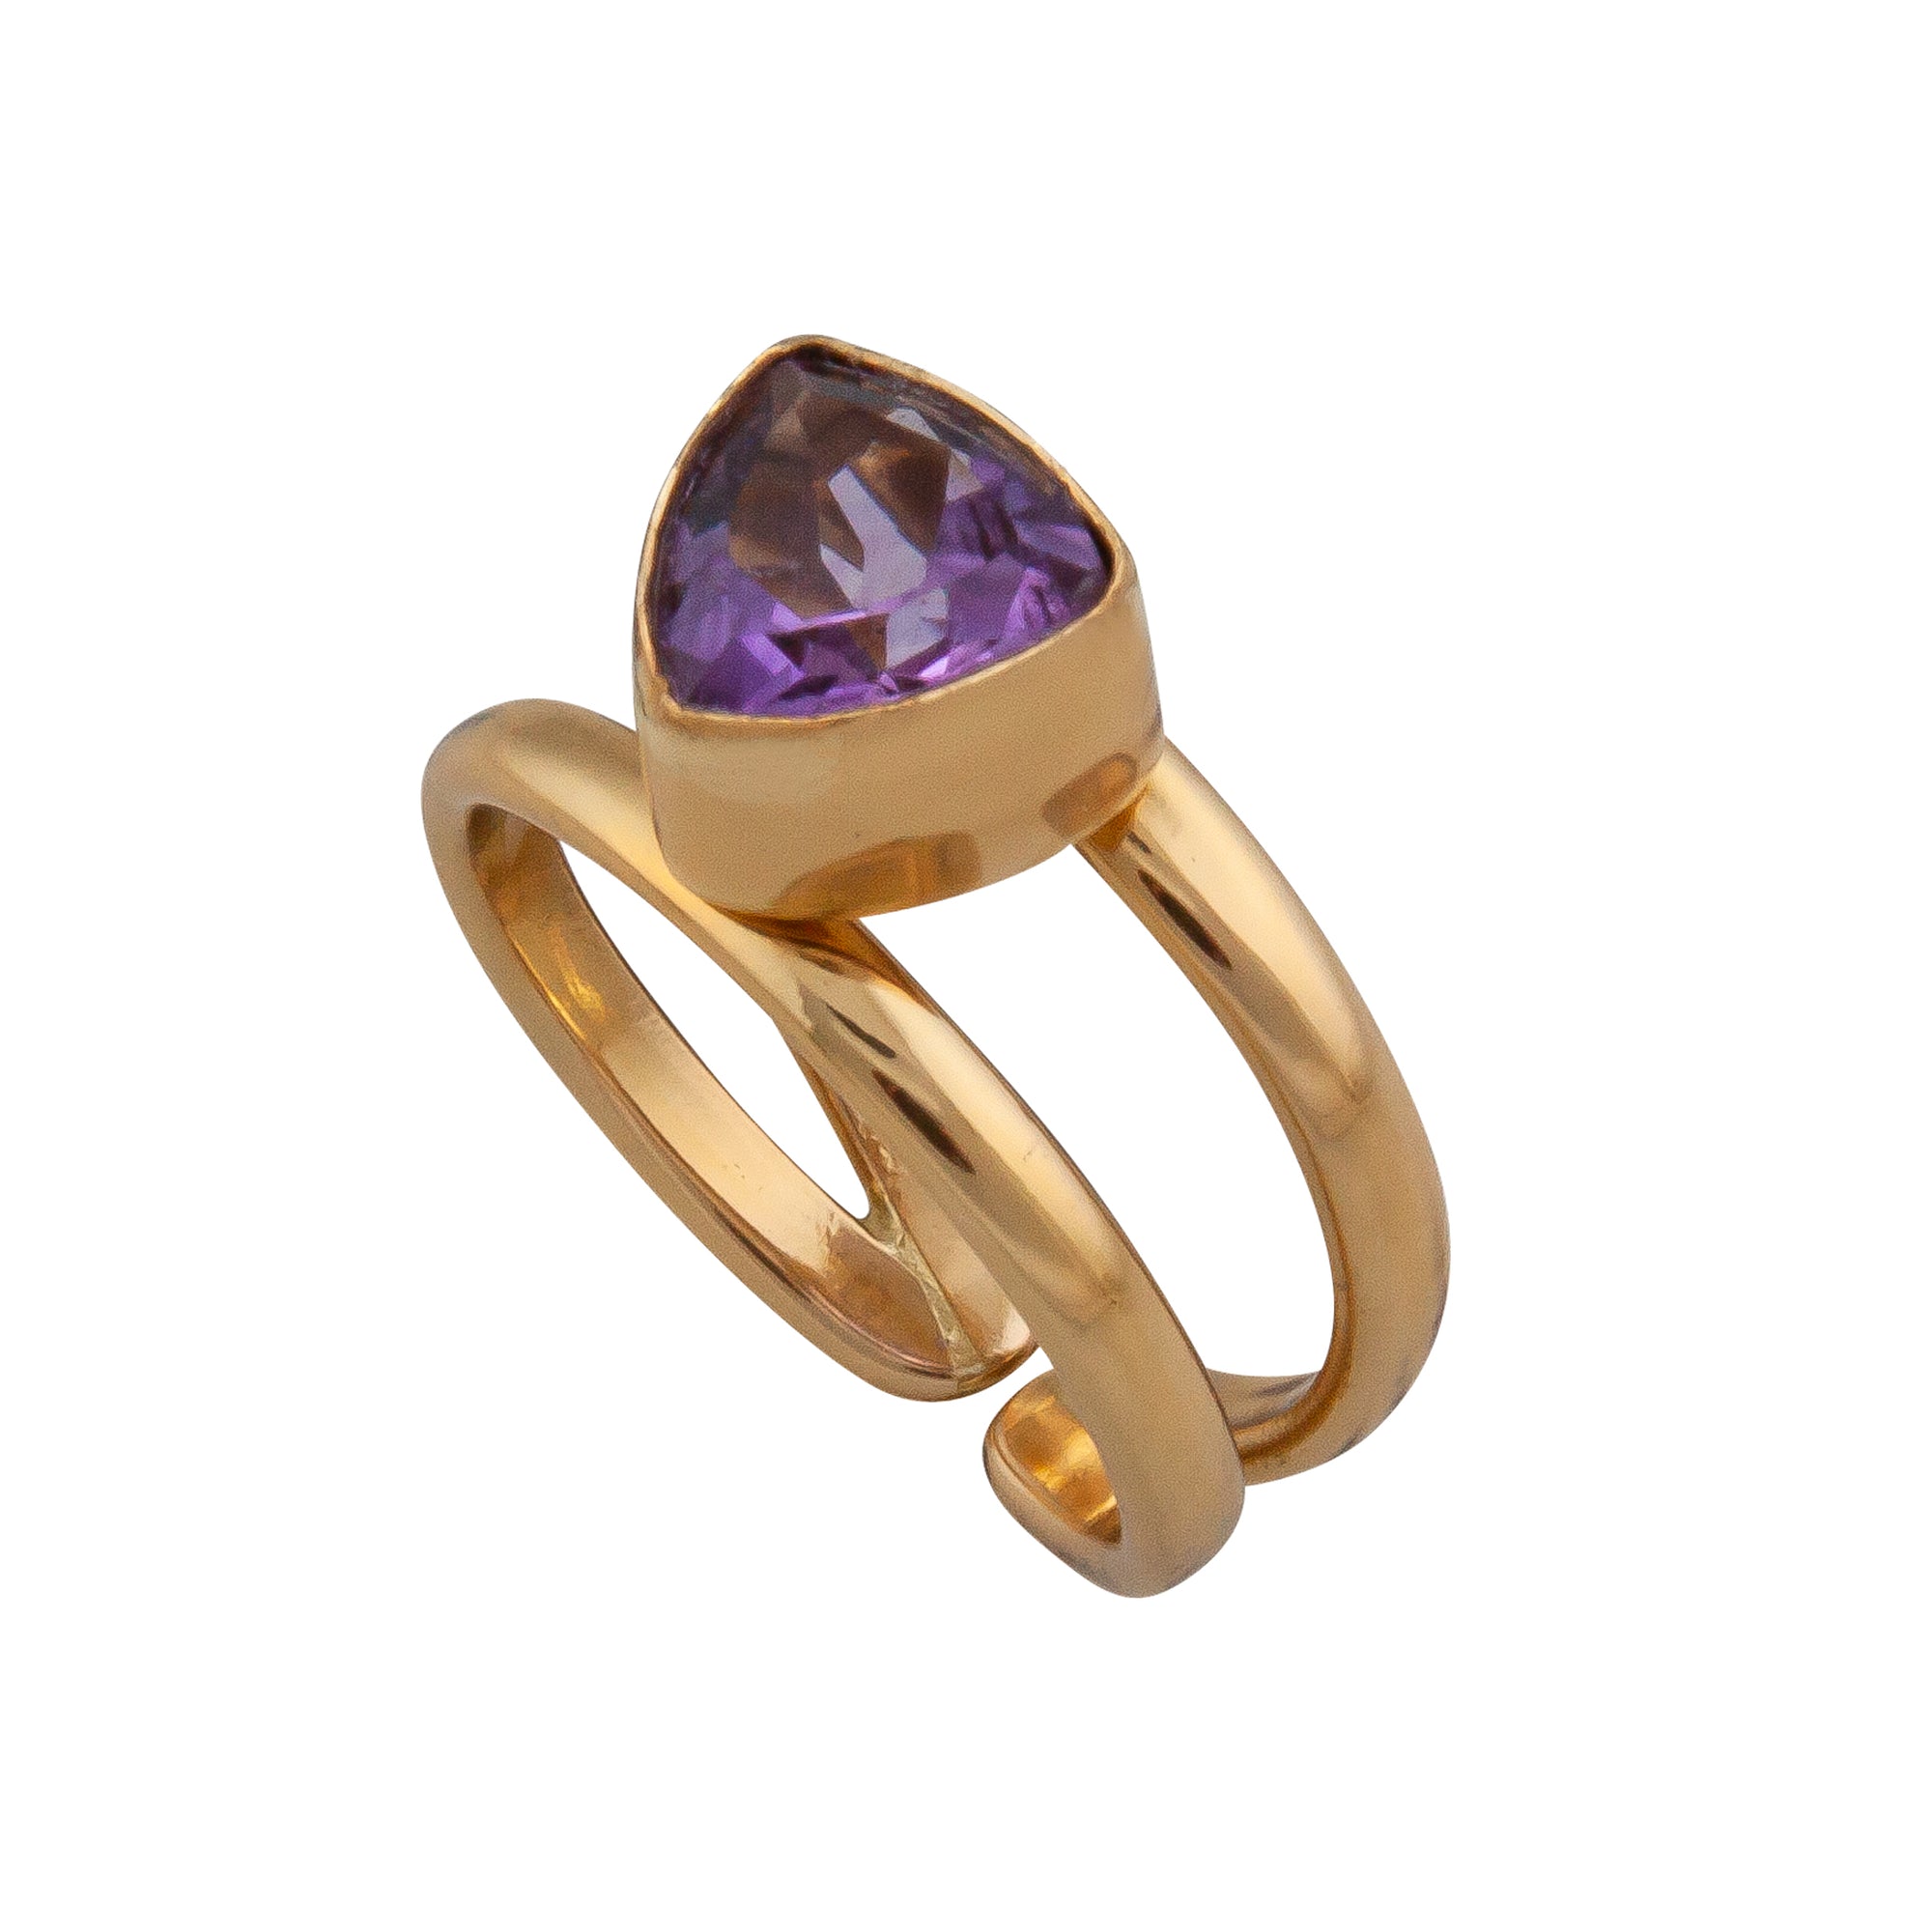 Charles Albert Jewelry - Alchemia Amethyst Trillion Double Band Cuff Ring - Side View